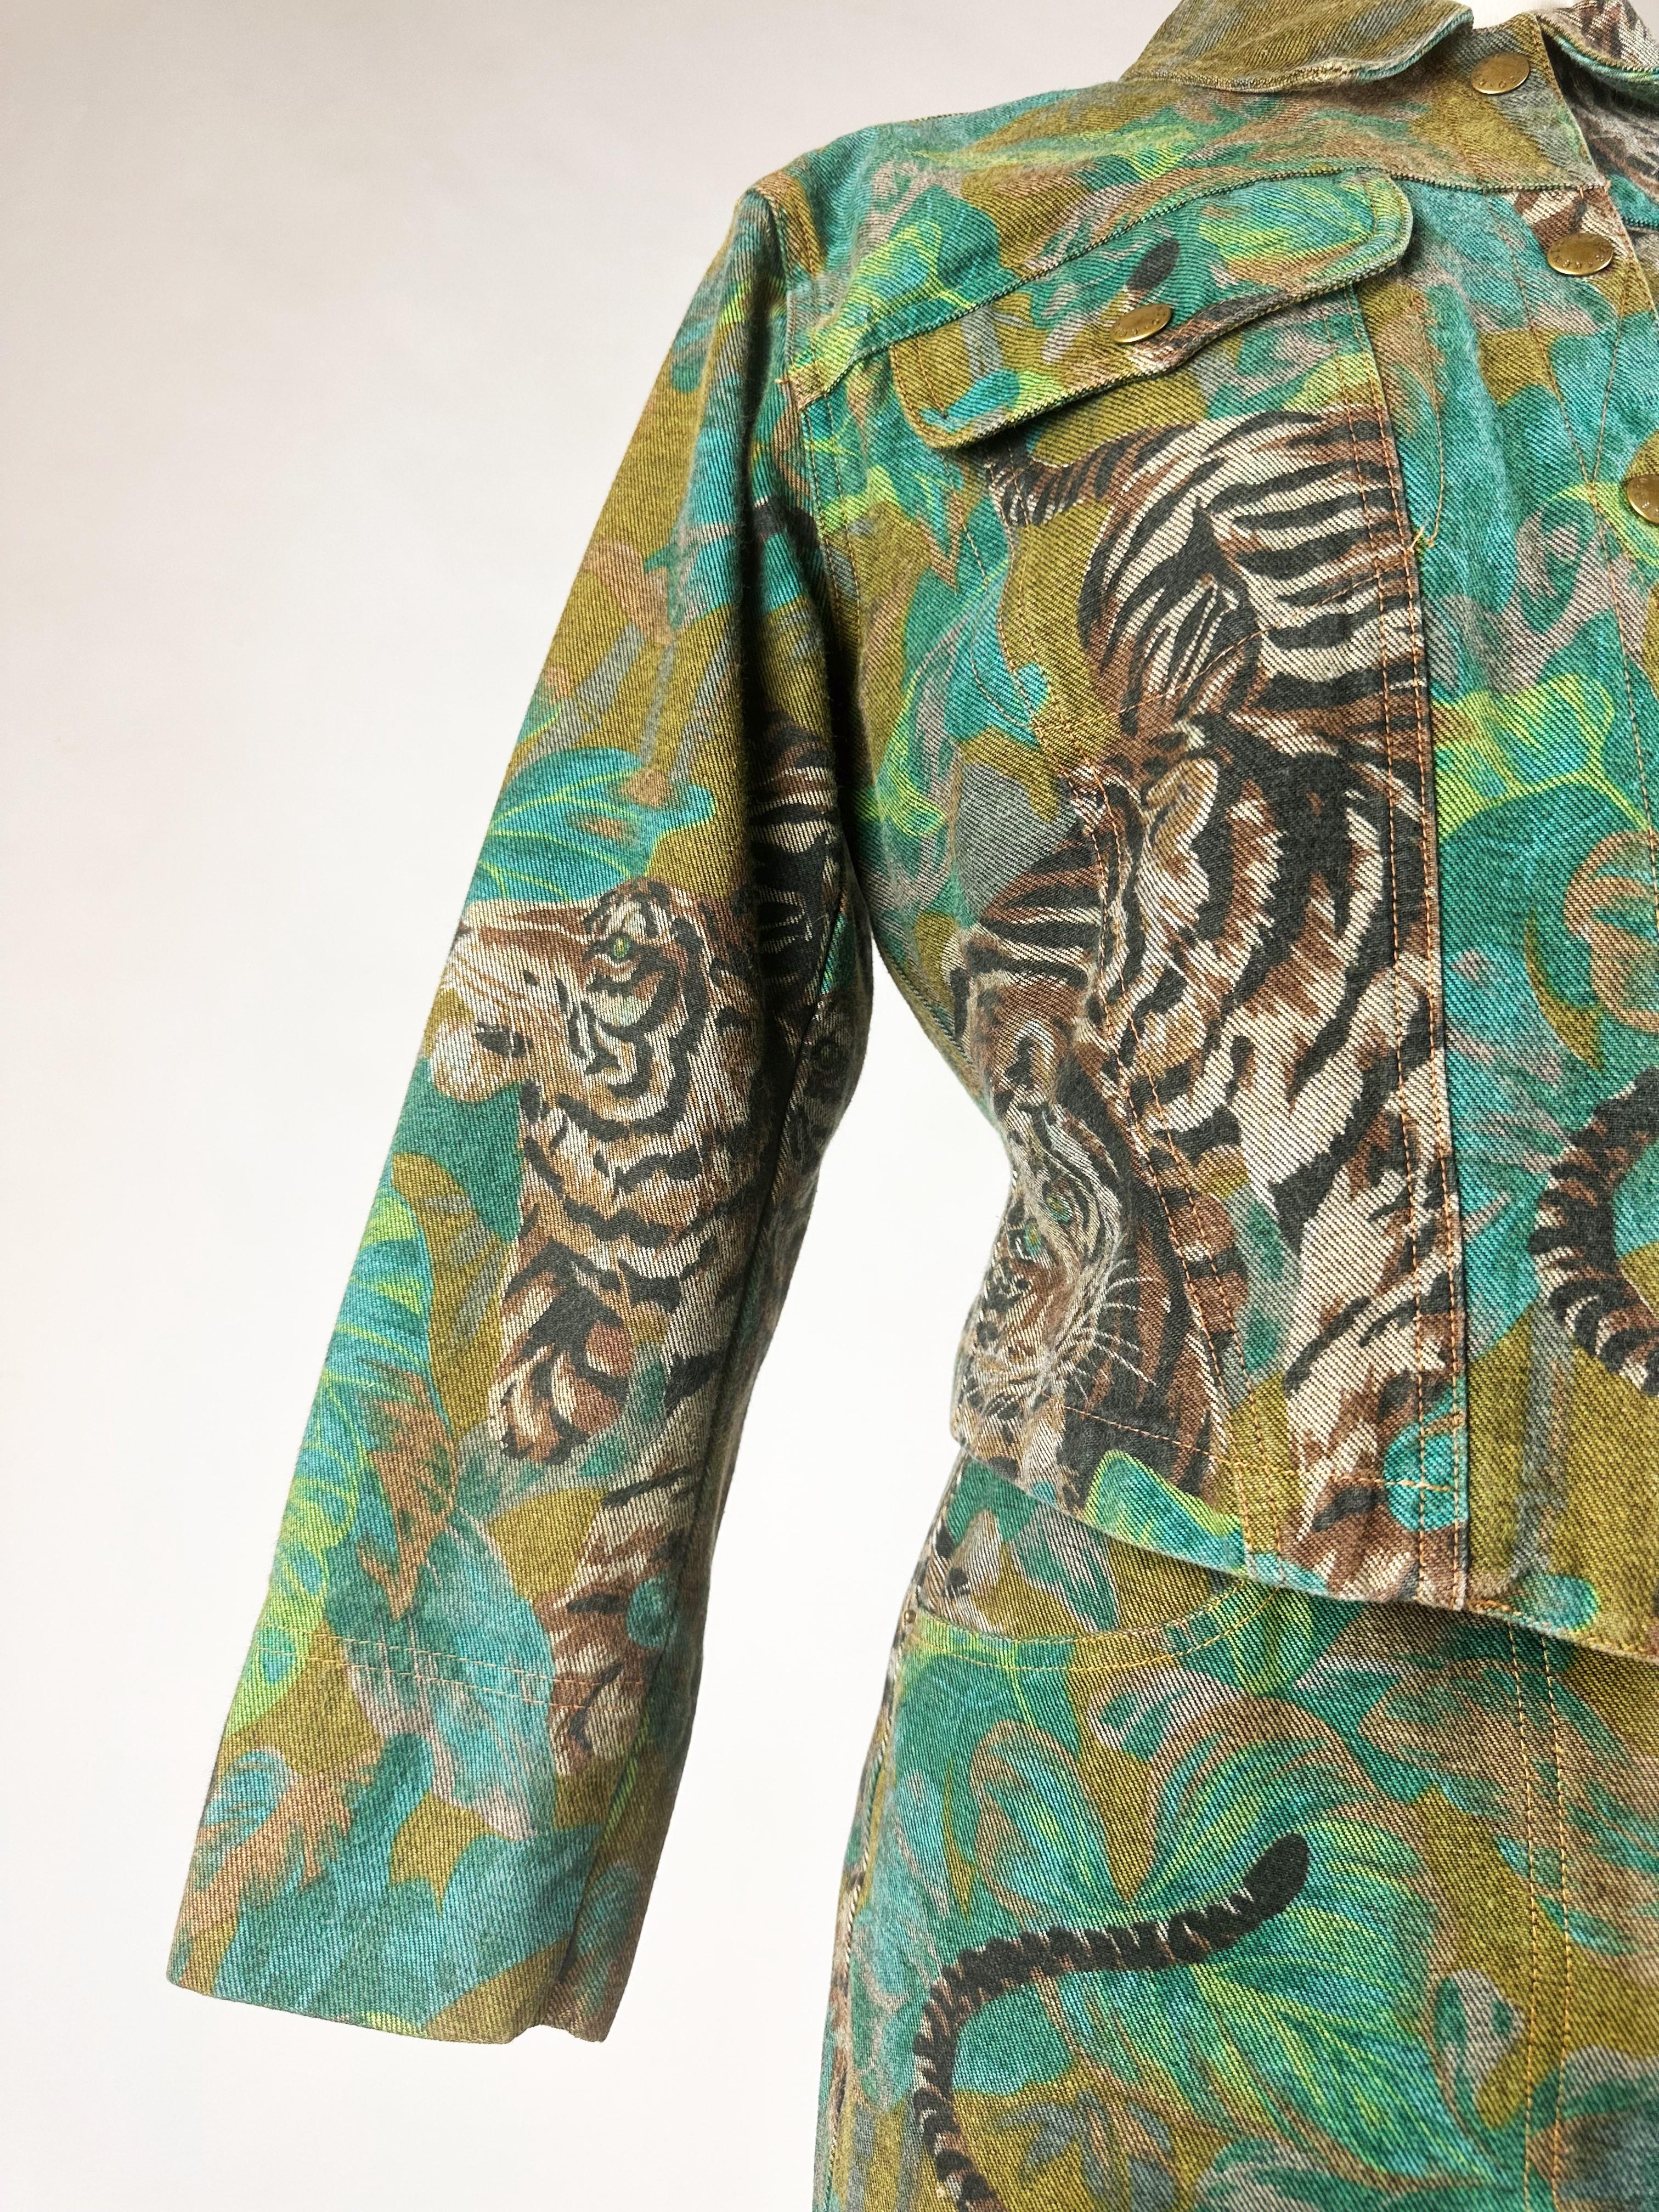 Jacket and Skirt by Kenzo Takada, Jungle & Tiger Print on Denim - French C. 1990 For Sale 2